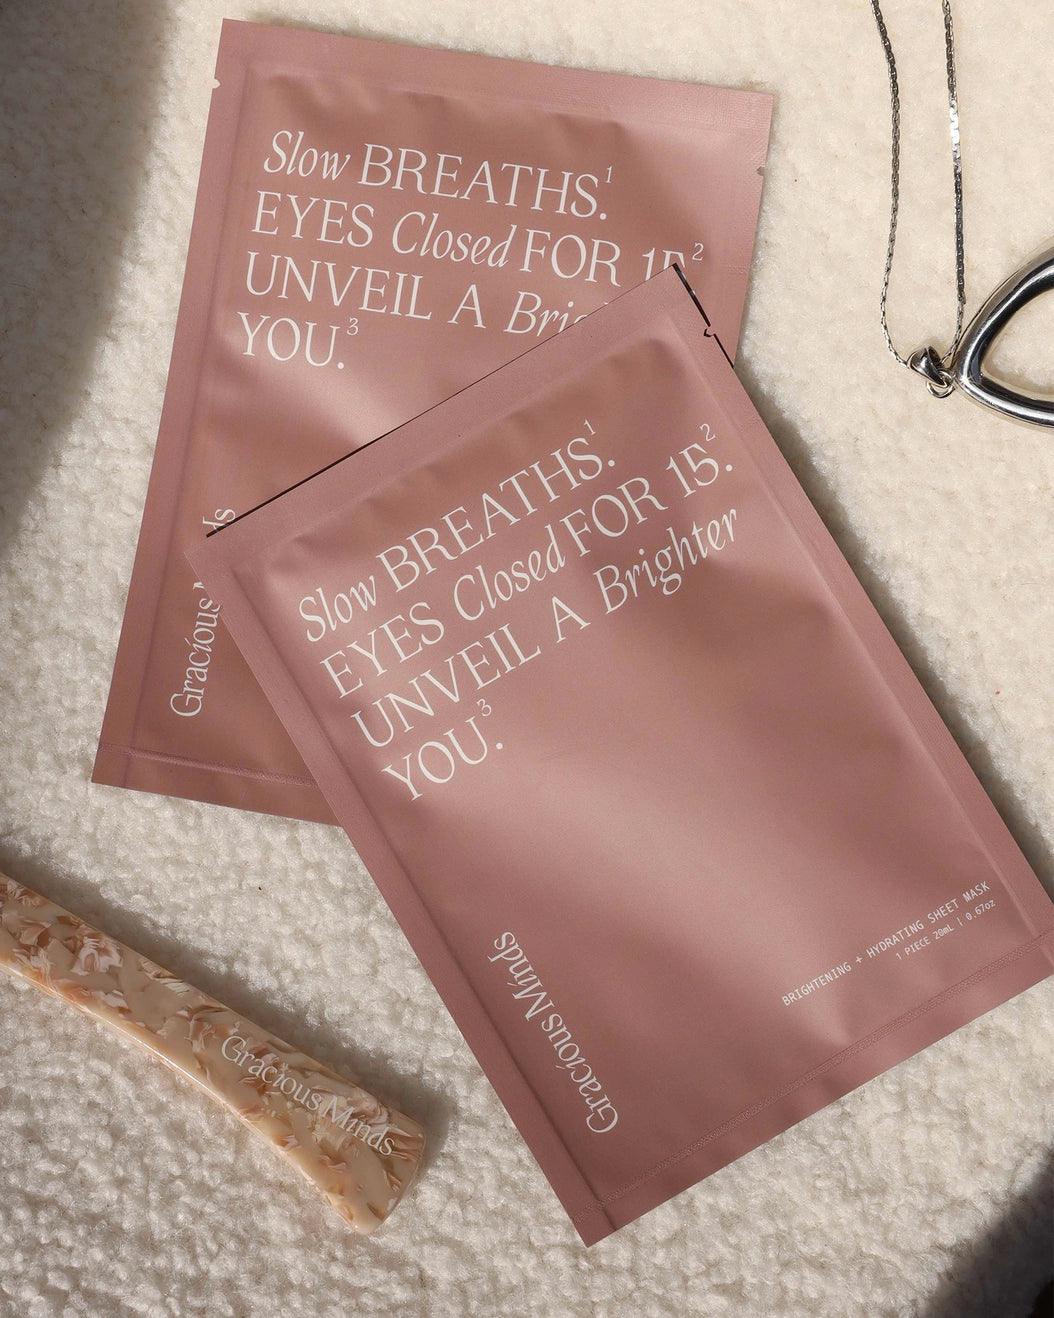 Bright Unveil Sheet Mask - THE SUS&TAIN STORE